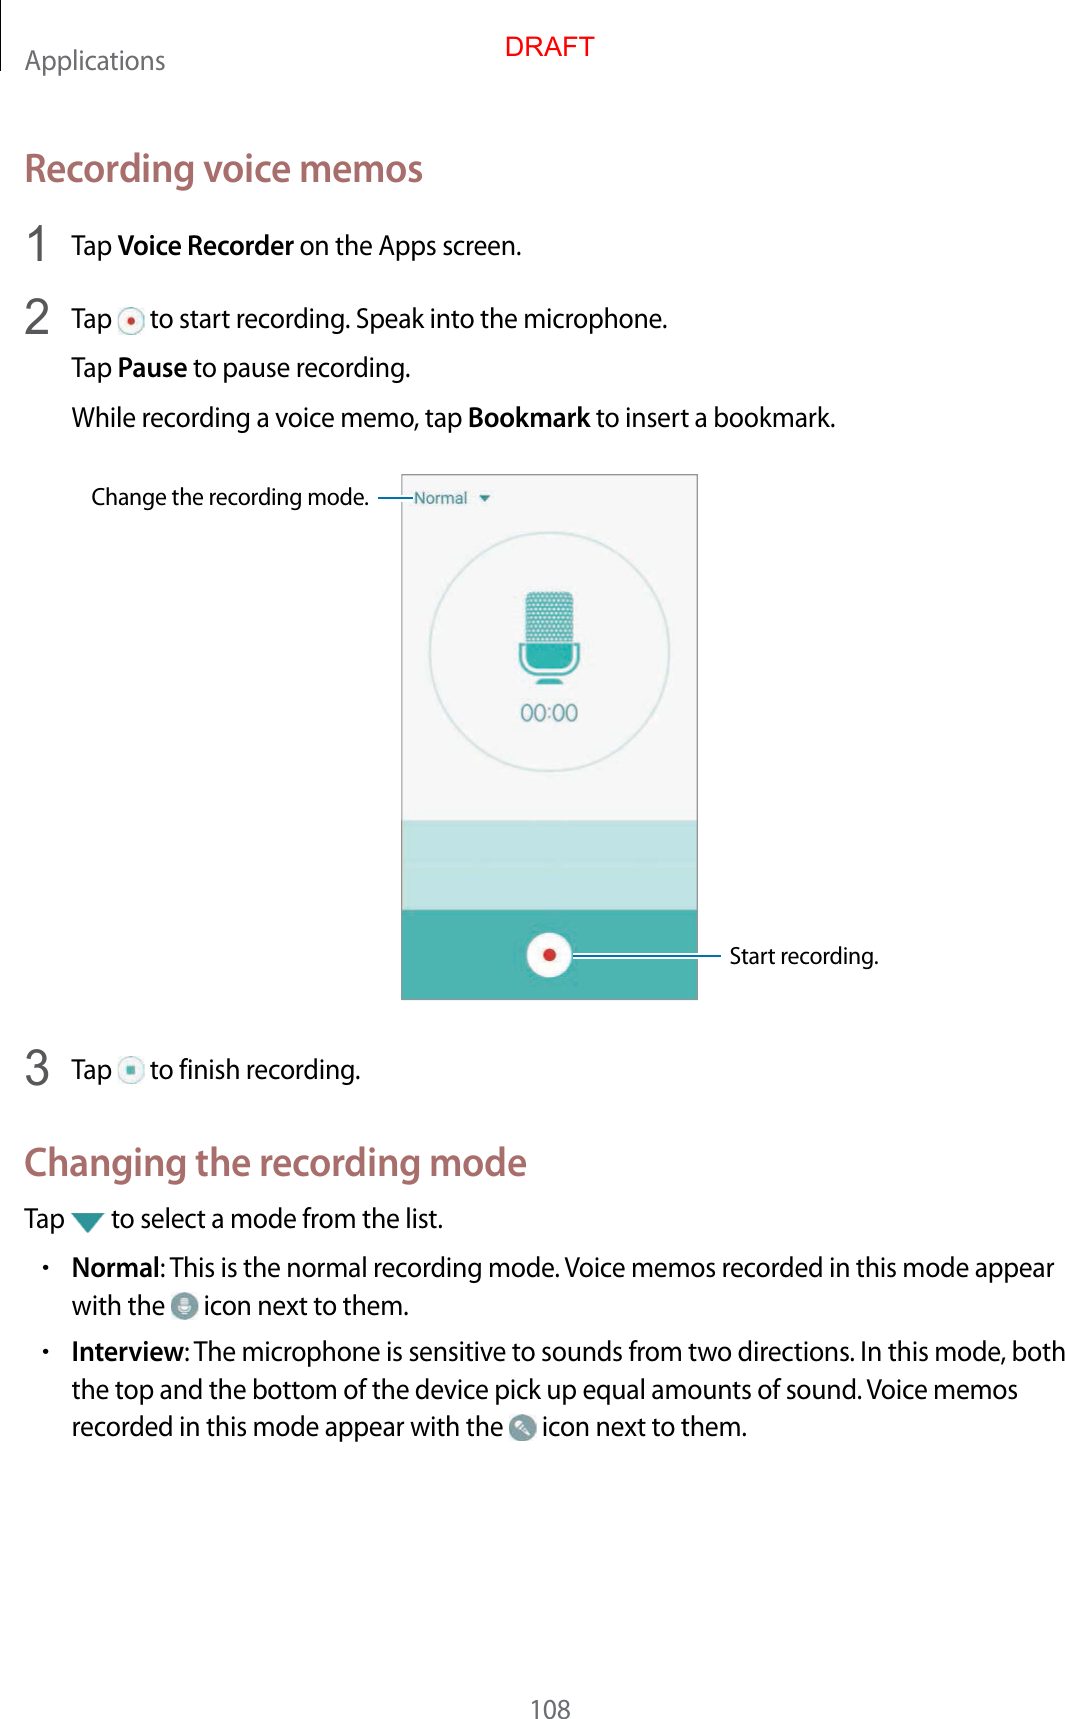 Applications108Recording voice memos1  Tap Voice Recorder on the Apps screen.2  Tap   to start recording. Speak into the microphone.Tap Pause to pause recording.While recording a voice memo, tap Bookmark to insert a bookmark.Change the recording mode.Start recording.3  Tap   to finish recording.Changing the recording modeTap   to select a mode from the list.•Normal: This is the normal recording mode. Voice memos recorded in this mode appear with the   icon next to them.•Interview: The microphone is sensitive to sounds from two directions. In this mode, both the top and the bottom of the device pick up equal amounts of sound. Voice memos recorded in this mode appear with the   icon next to them.DRAFT